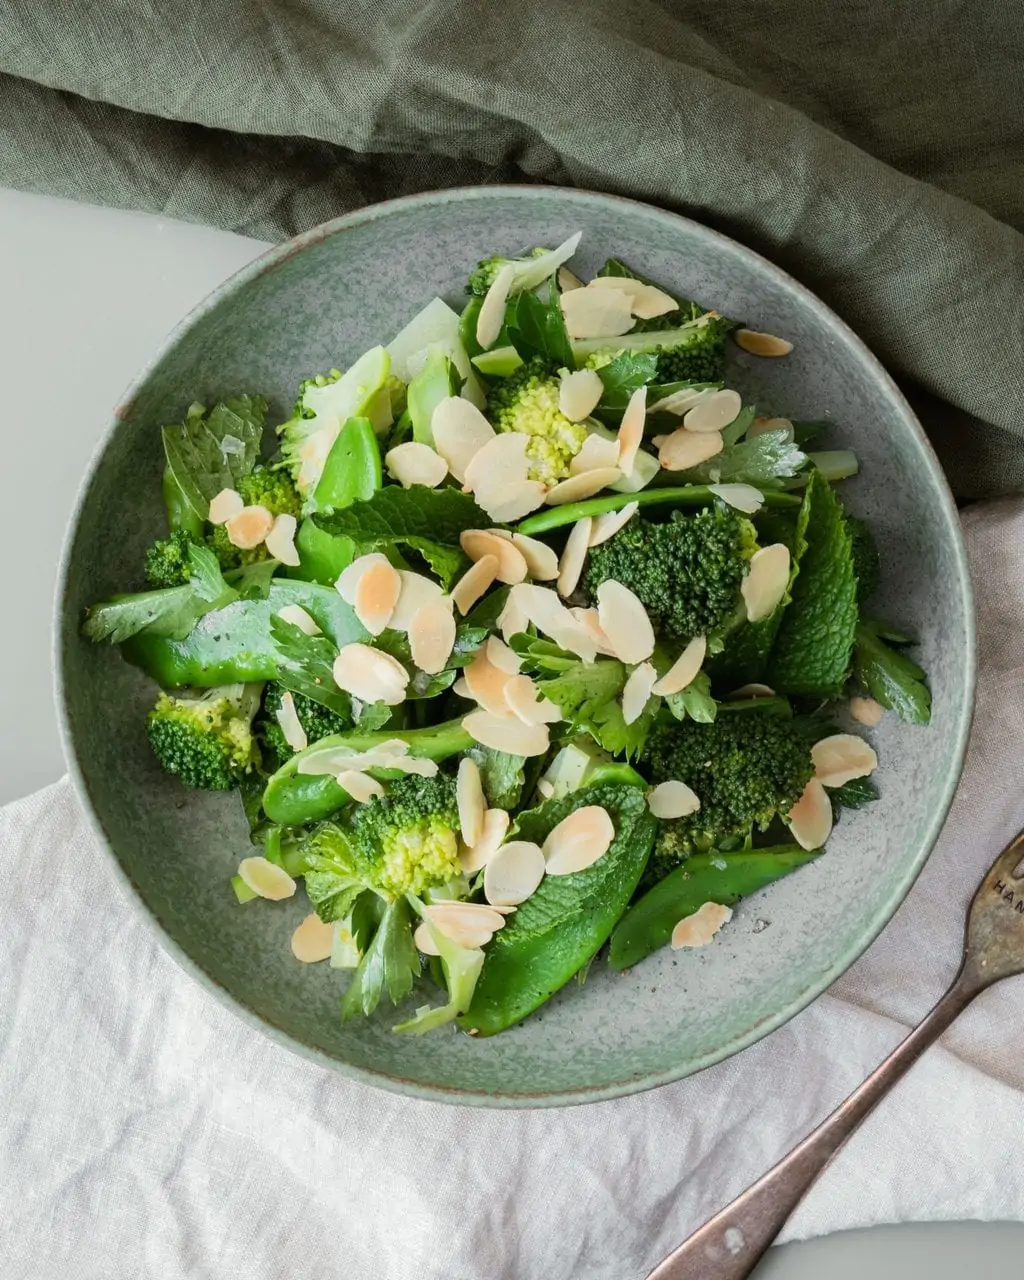 snow pea and broccoli salad from above